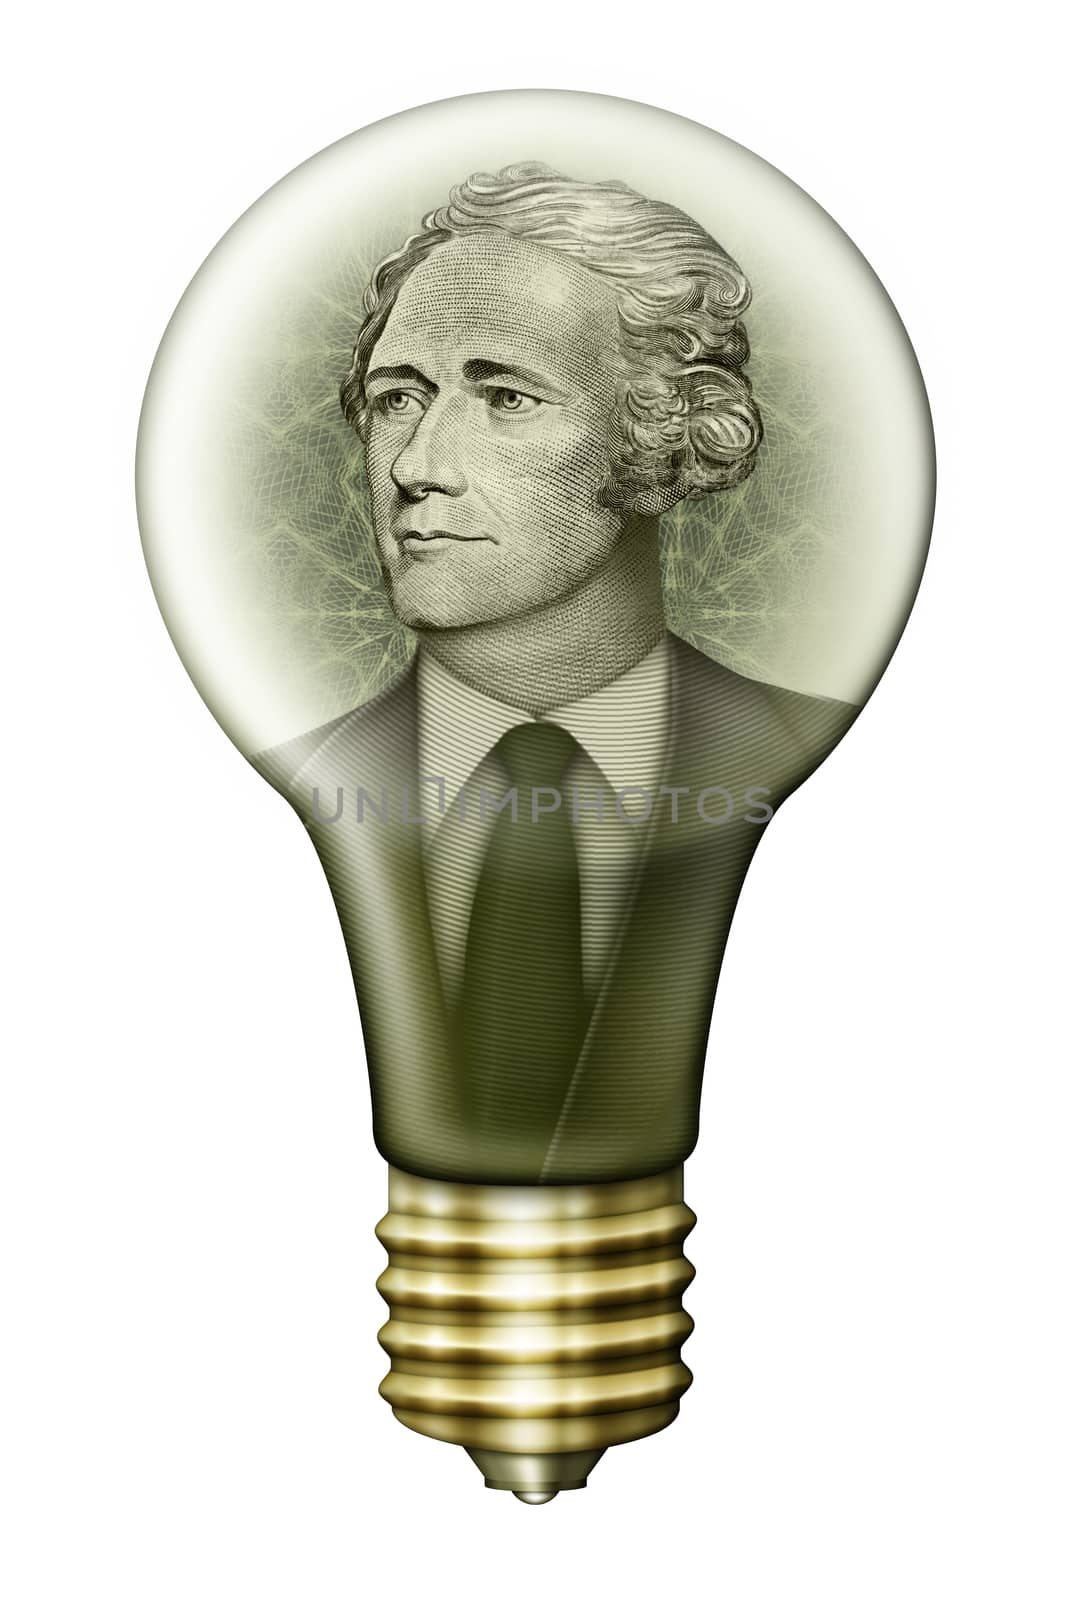 Photo-Illustration using parts of U.S. currency bills combined with my digital illustration of a light bulb.